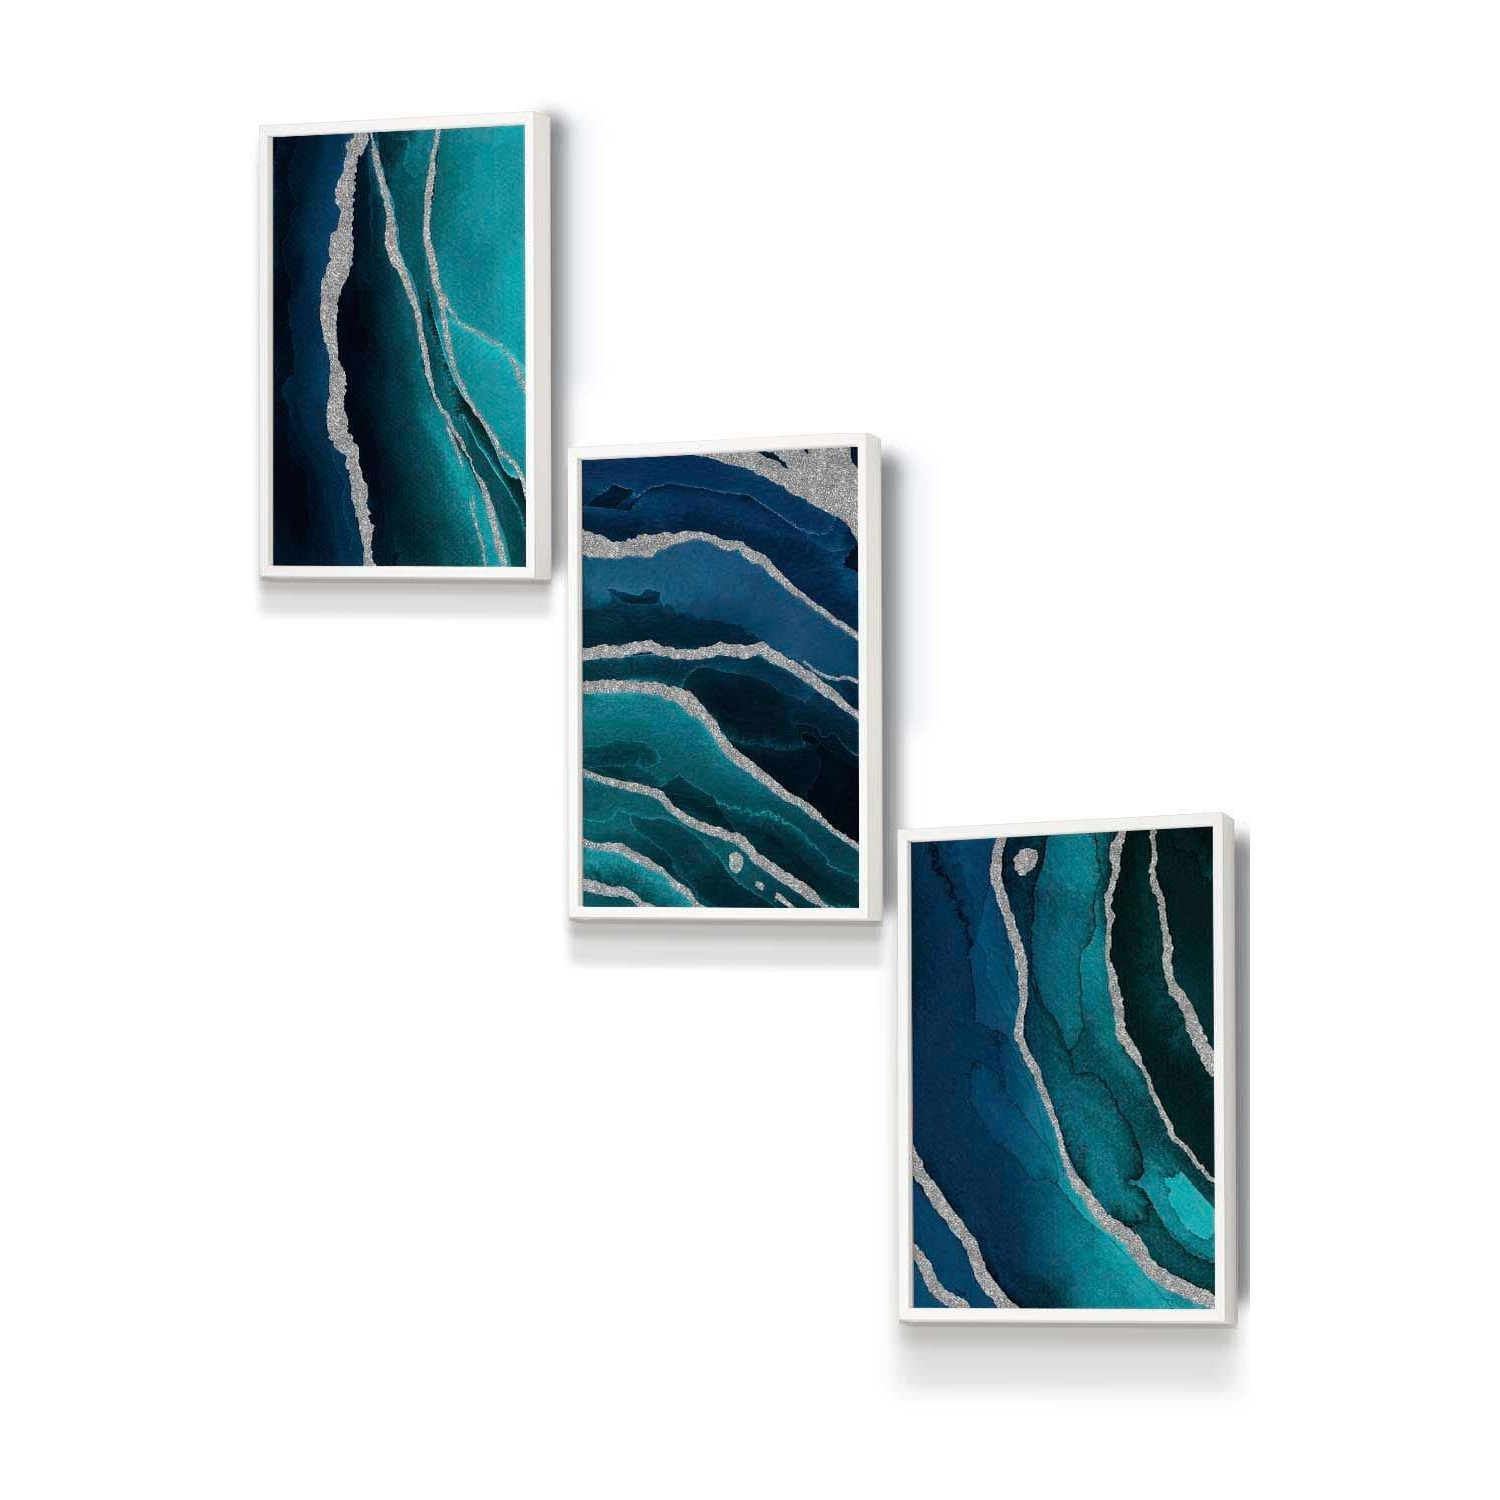 Abstract Teal Blue Silver Strokes Framed Wall Art - Small - image 1